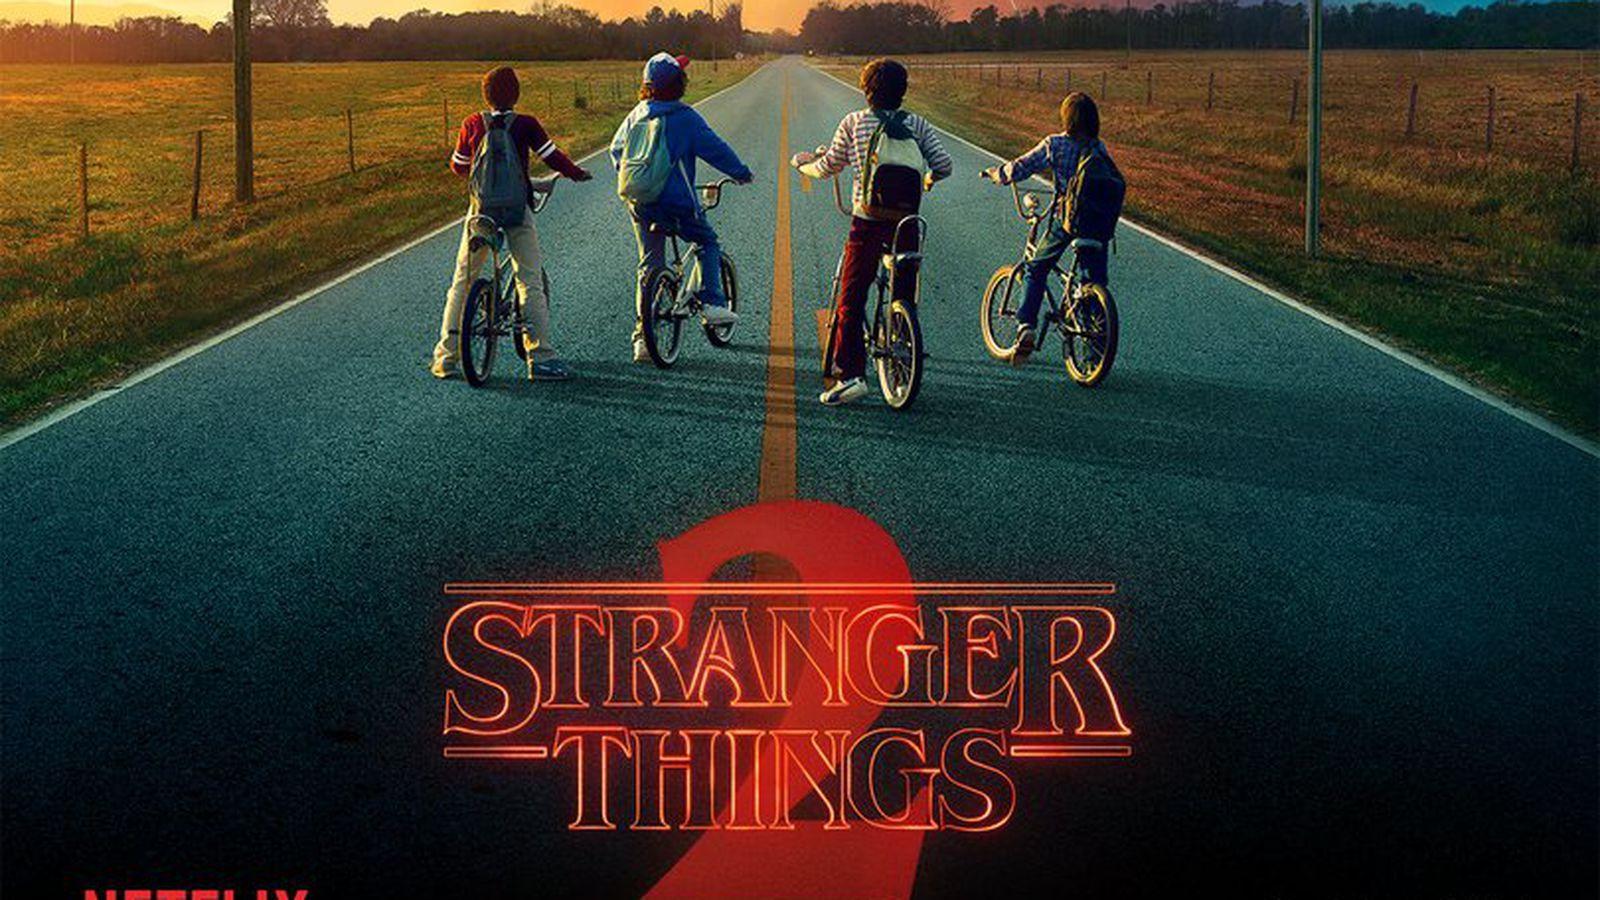 The Stranger Things 2 poster hints at more ways the show will